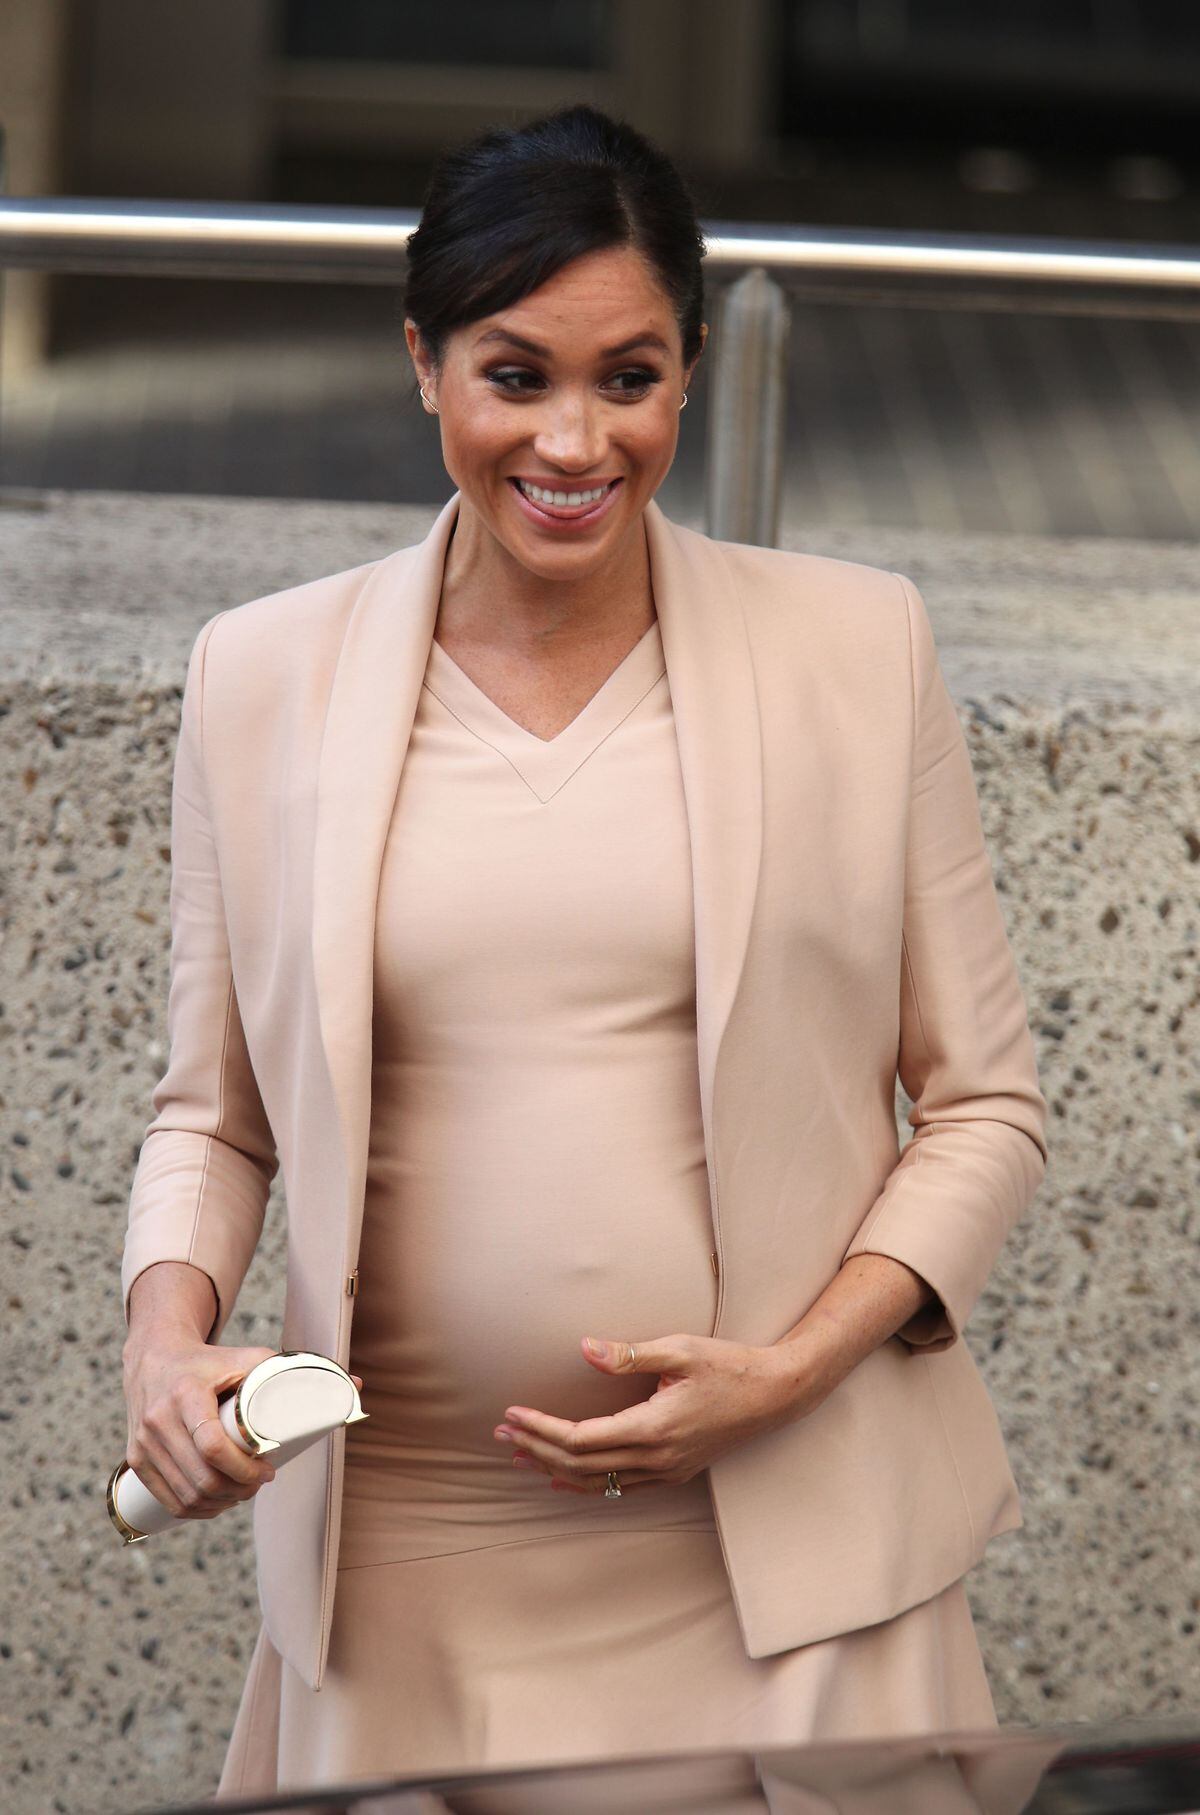 Meghan with her bump